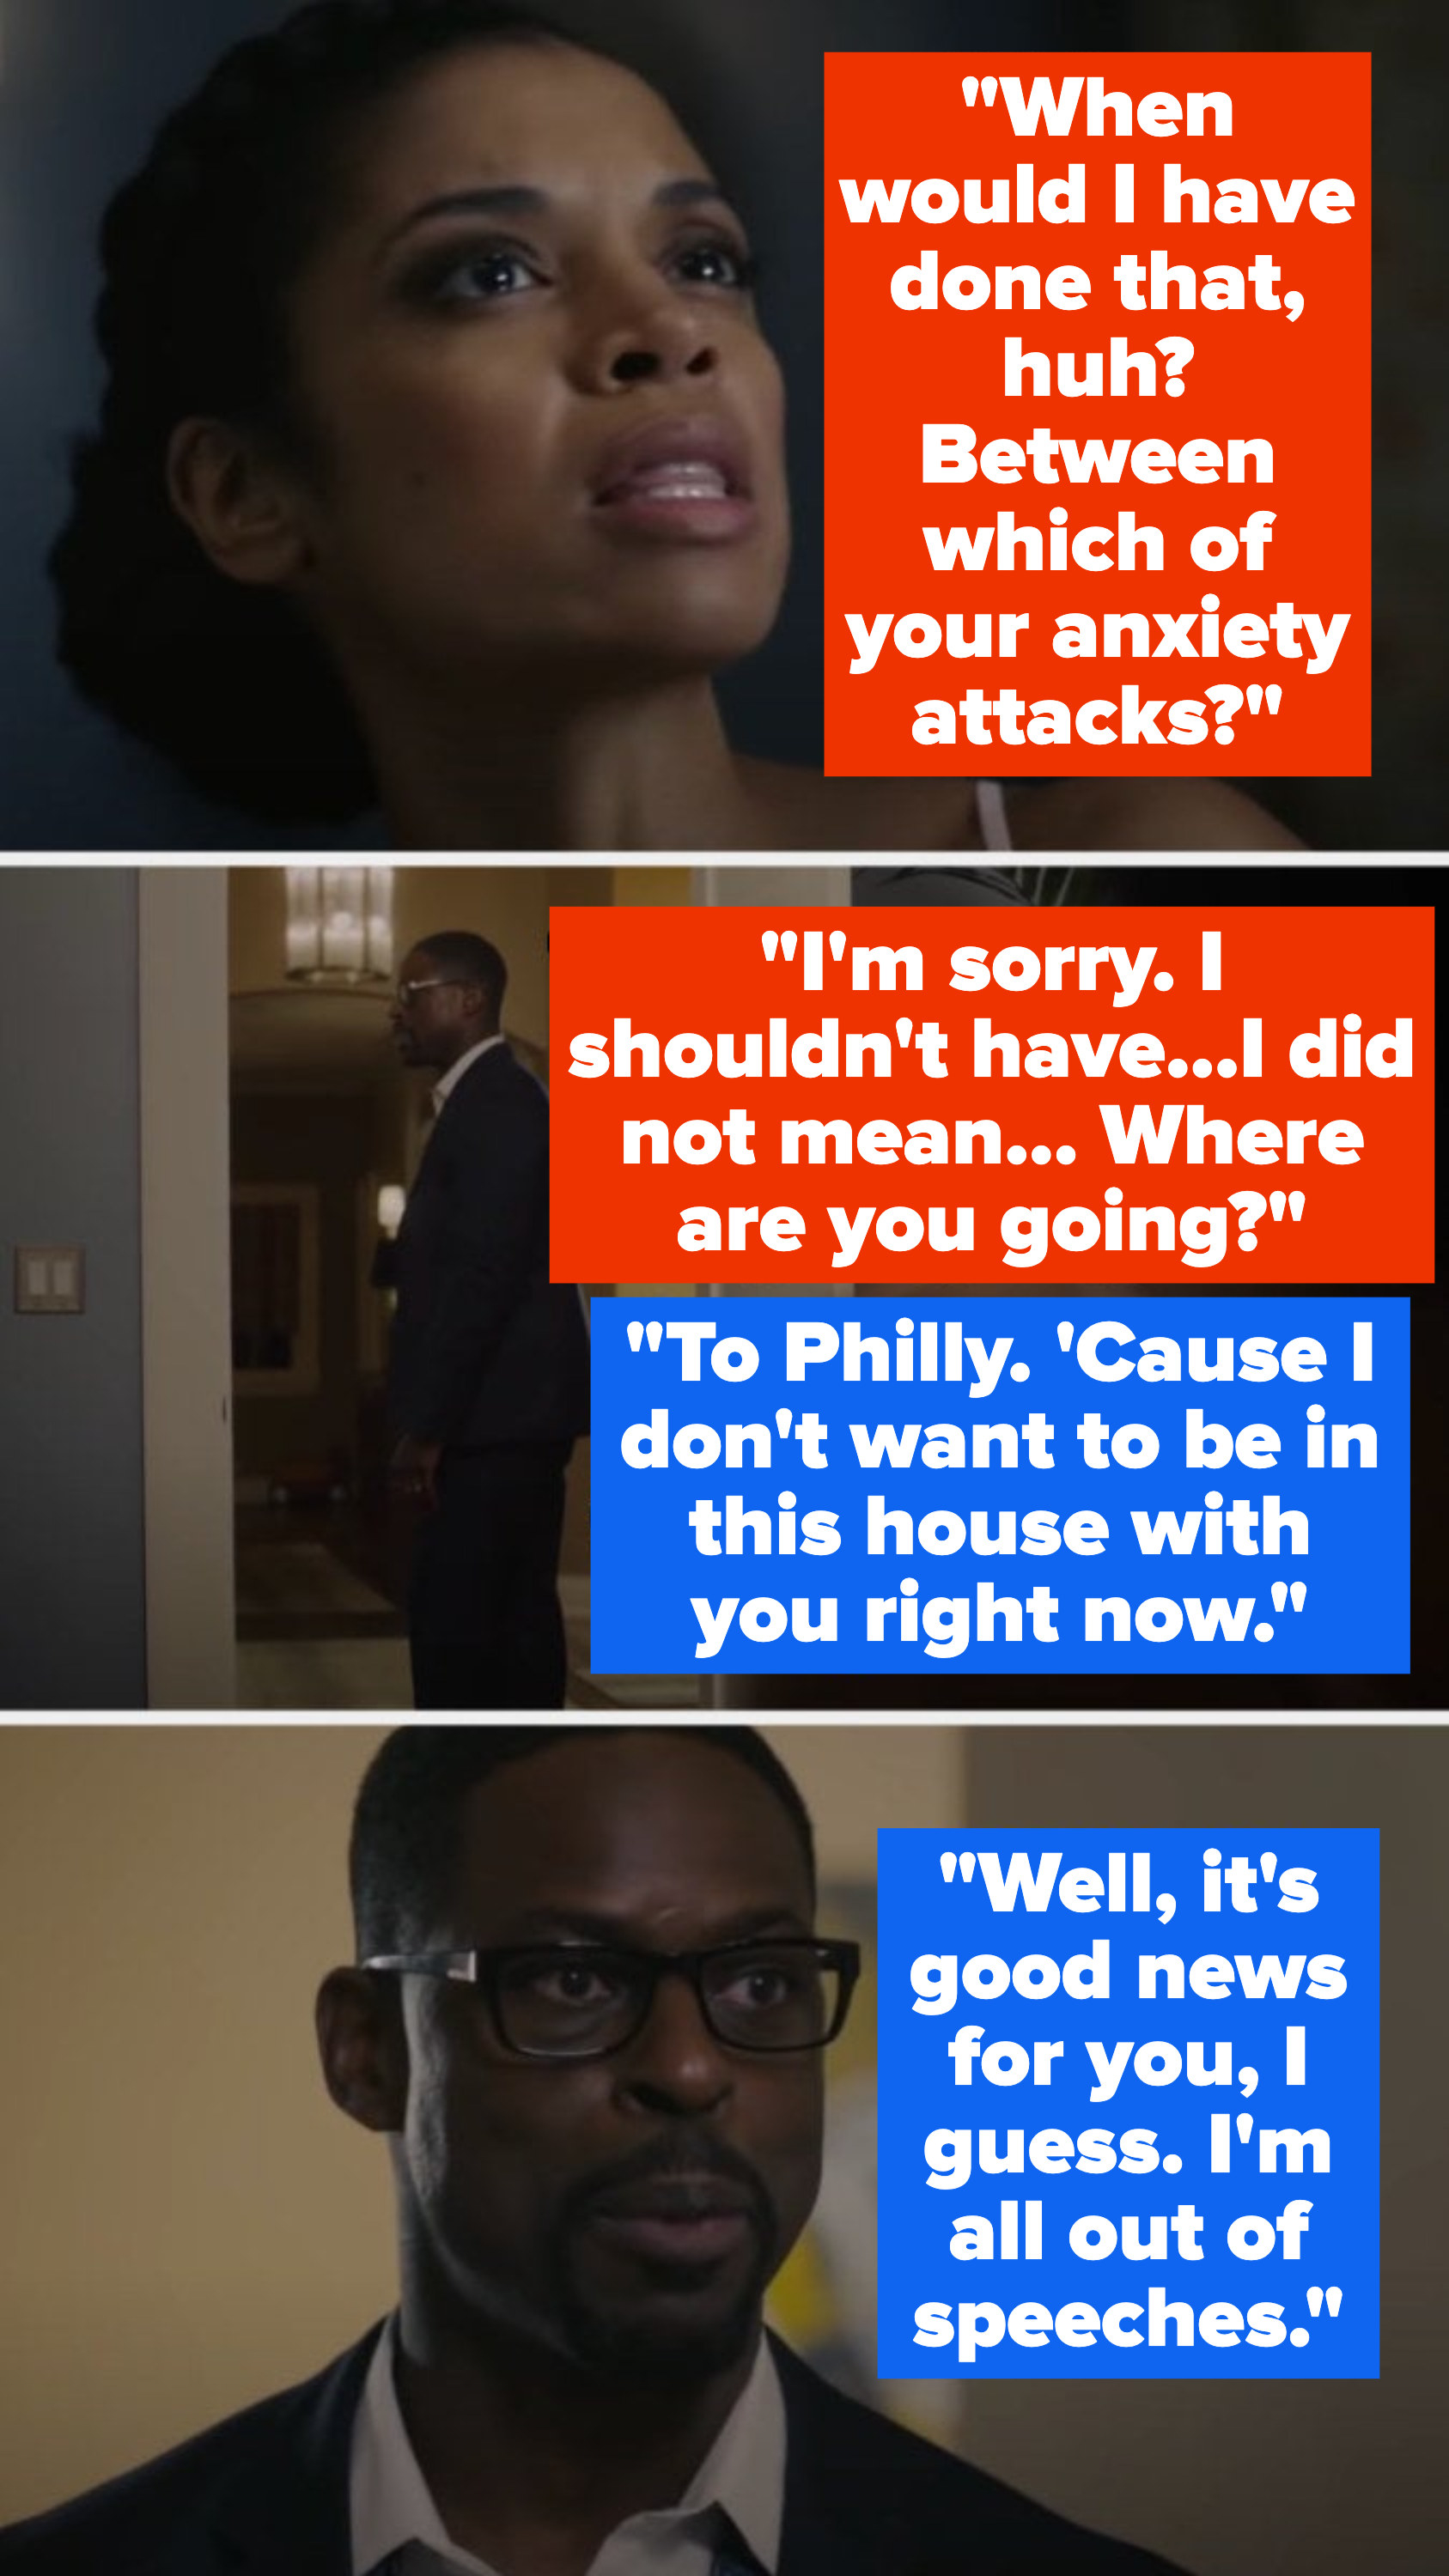 Beth asks when she would&#x27;ve done that, between which of his anxiety attacks, then apologizes – Randall says he&#x27;s going to Philly since he doesn&#x27;t want to be around her, and says he&#x27;s out of speeches